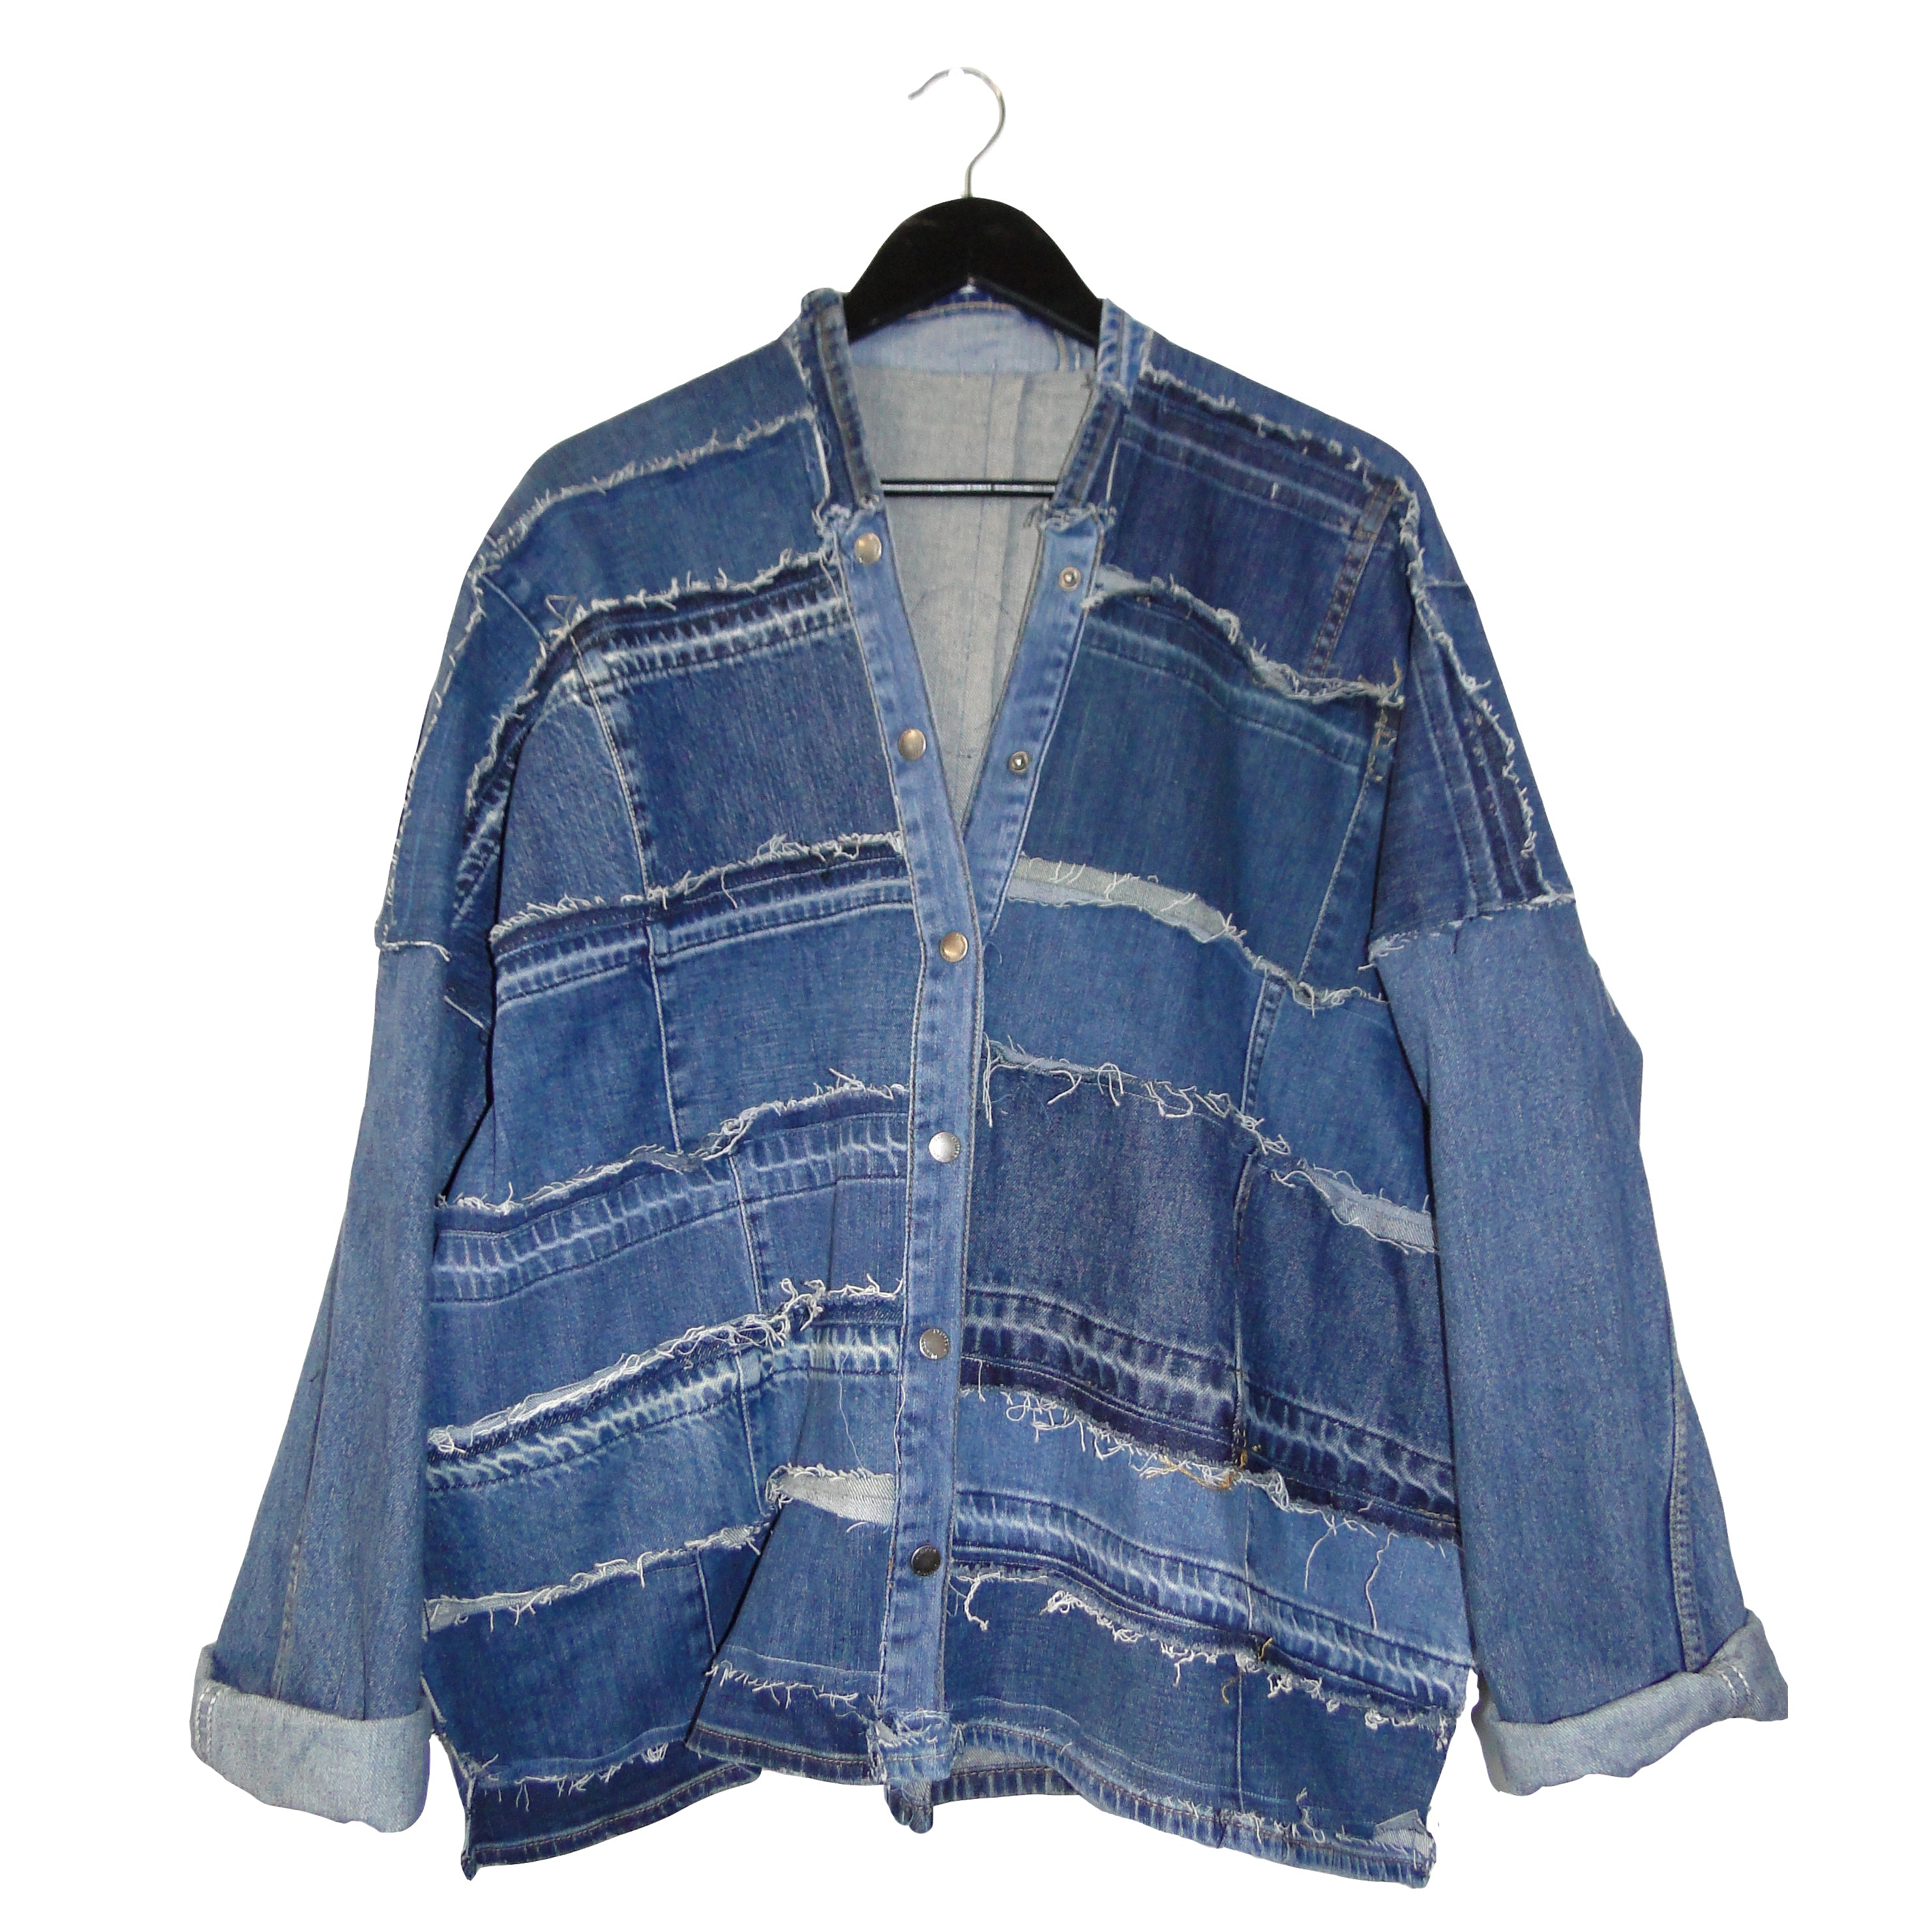 Through Being Cool - Upcycled denim jacket